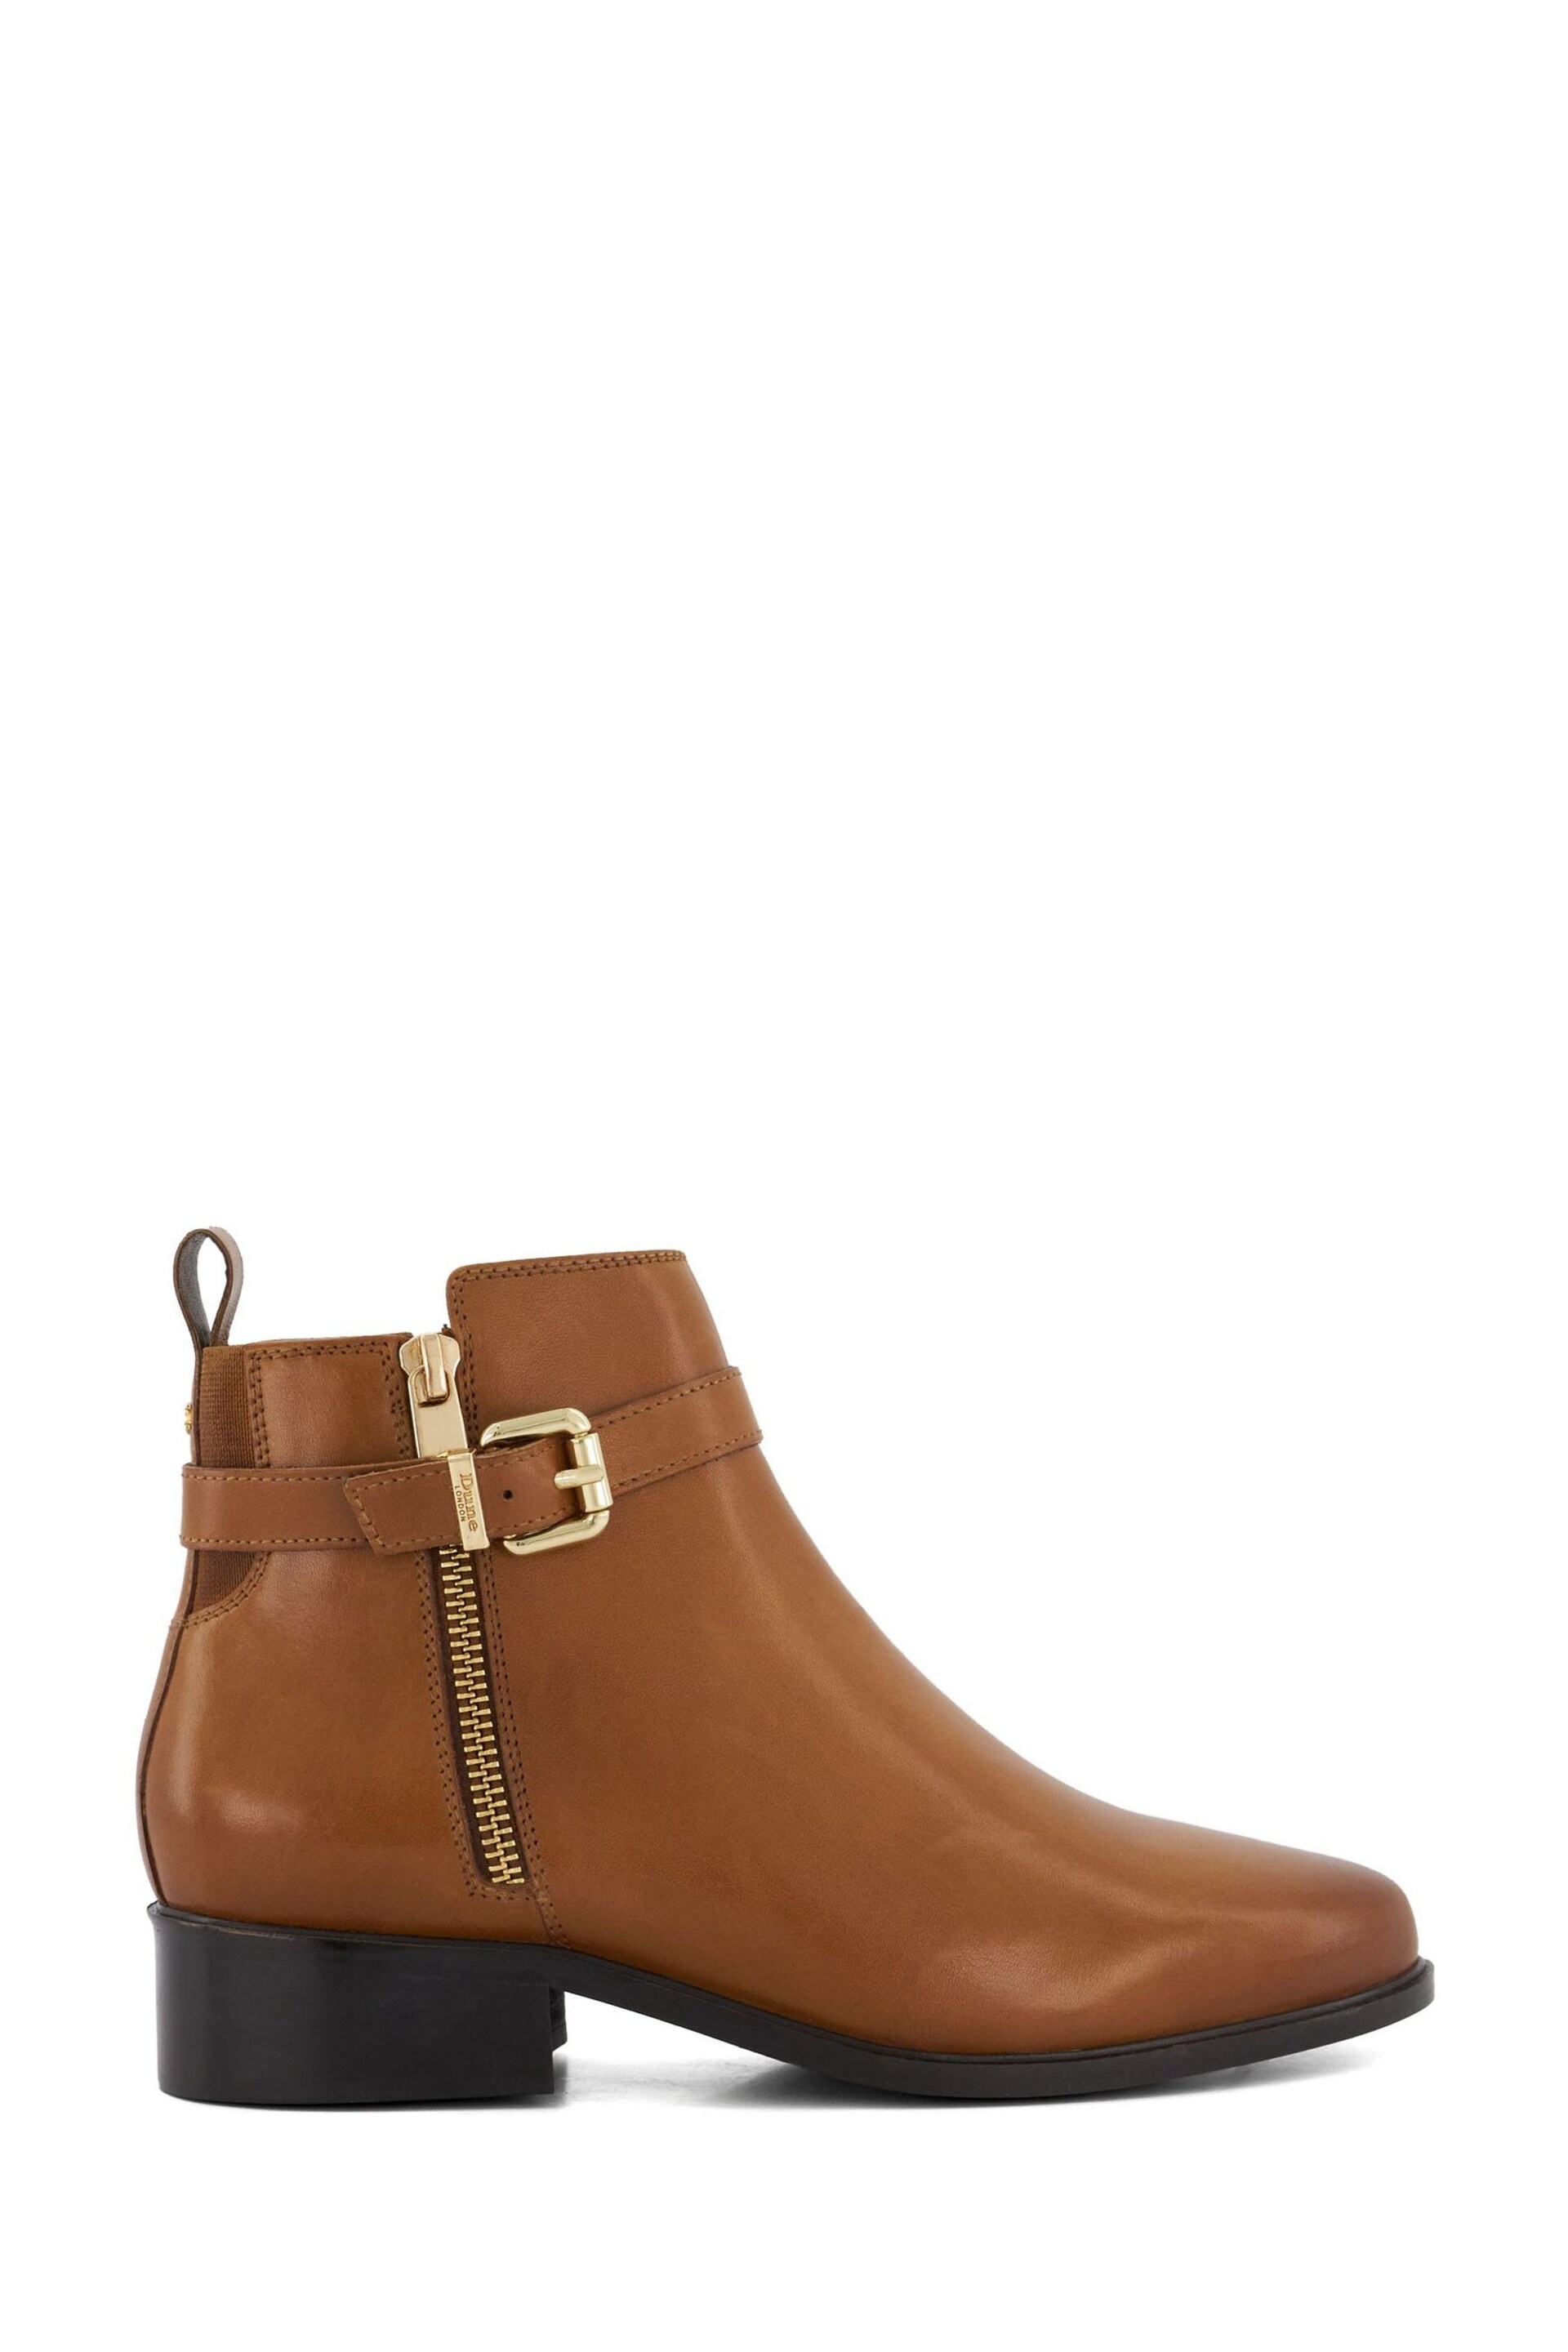 Dune London Brown Pepi Branded Trim Ankle Boots - Image 1 of 6